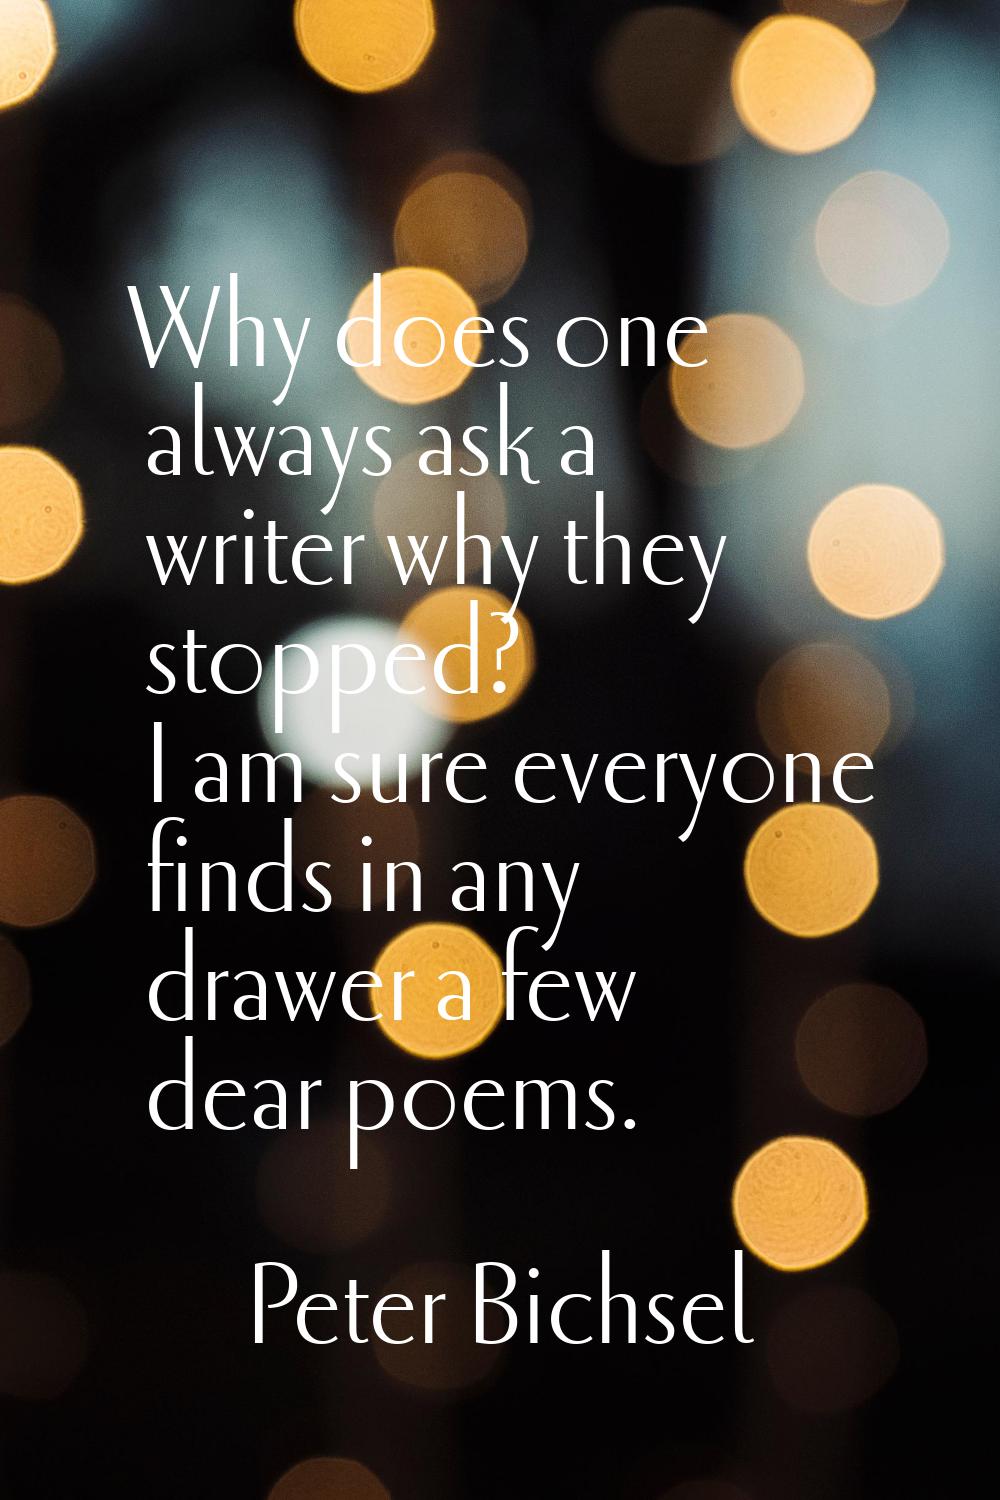 Why does one always ask a writer why they stopped? I am sure everyone finds in any drawer a few dea